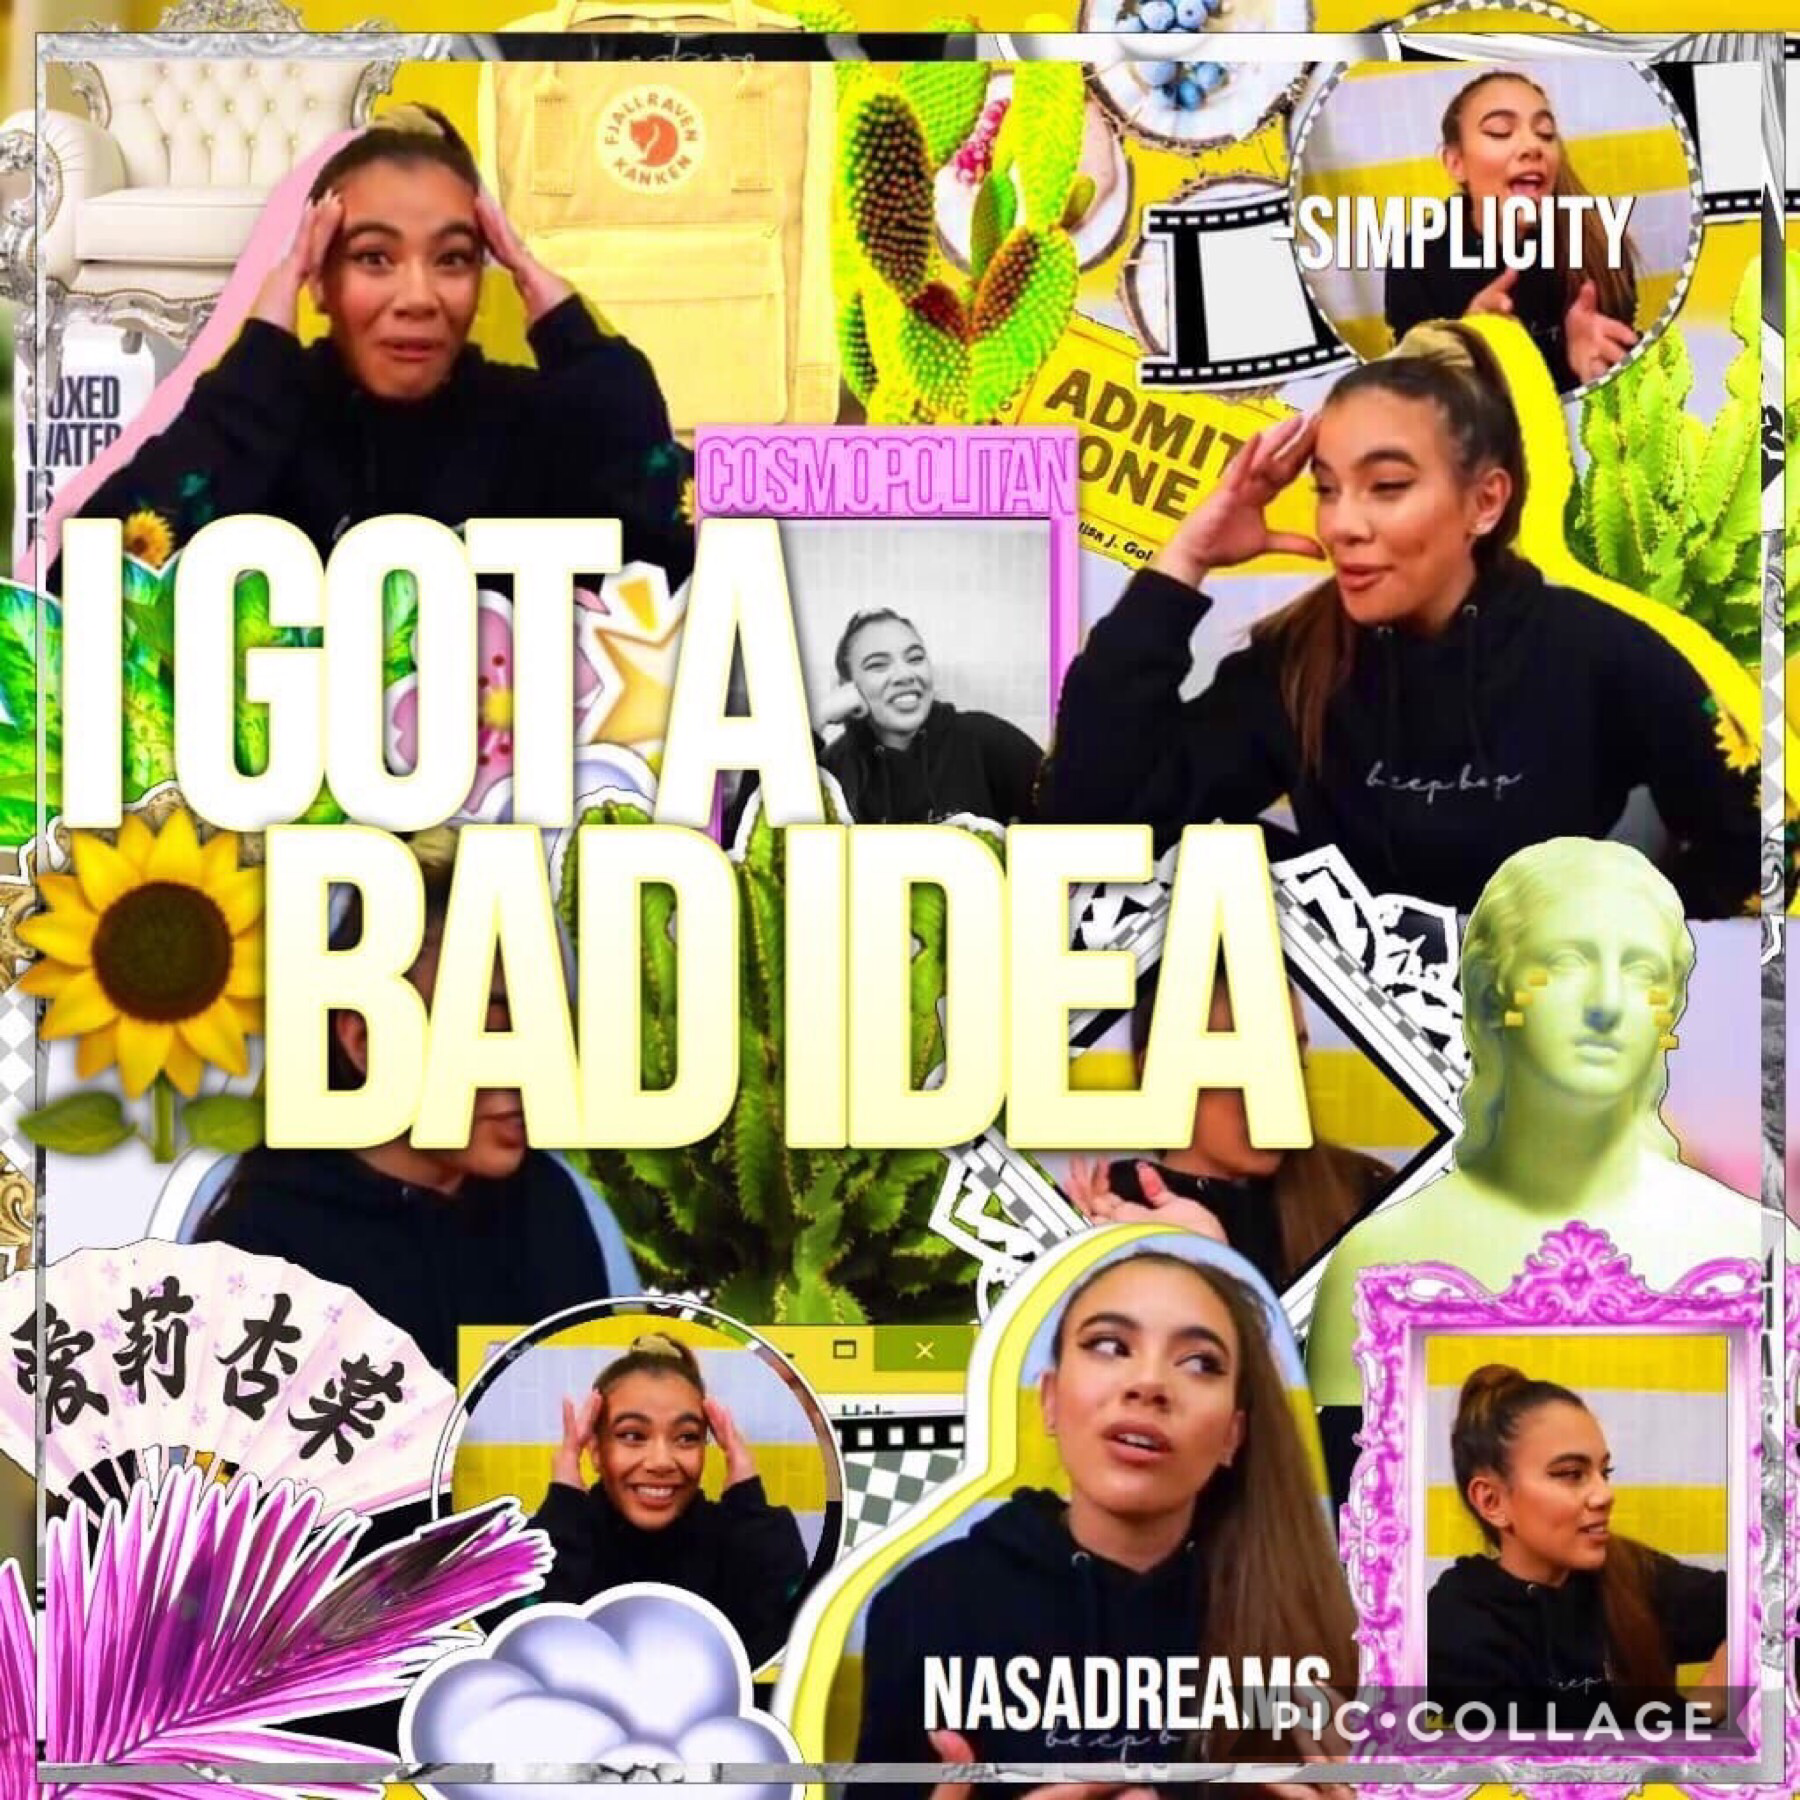 Collab with..,,
Nasadreams!!! She is so amazing and talented!! If you wanted to know, I did the ugly side😂
QOTD: Ariana grande or Taylor Swift
AOTD: Ariana Grande🤣